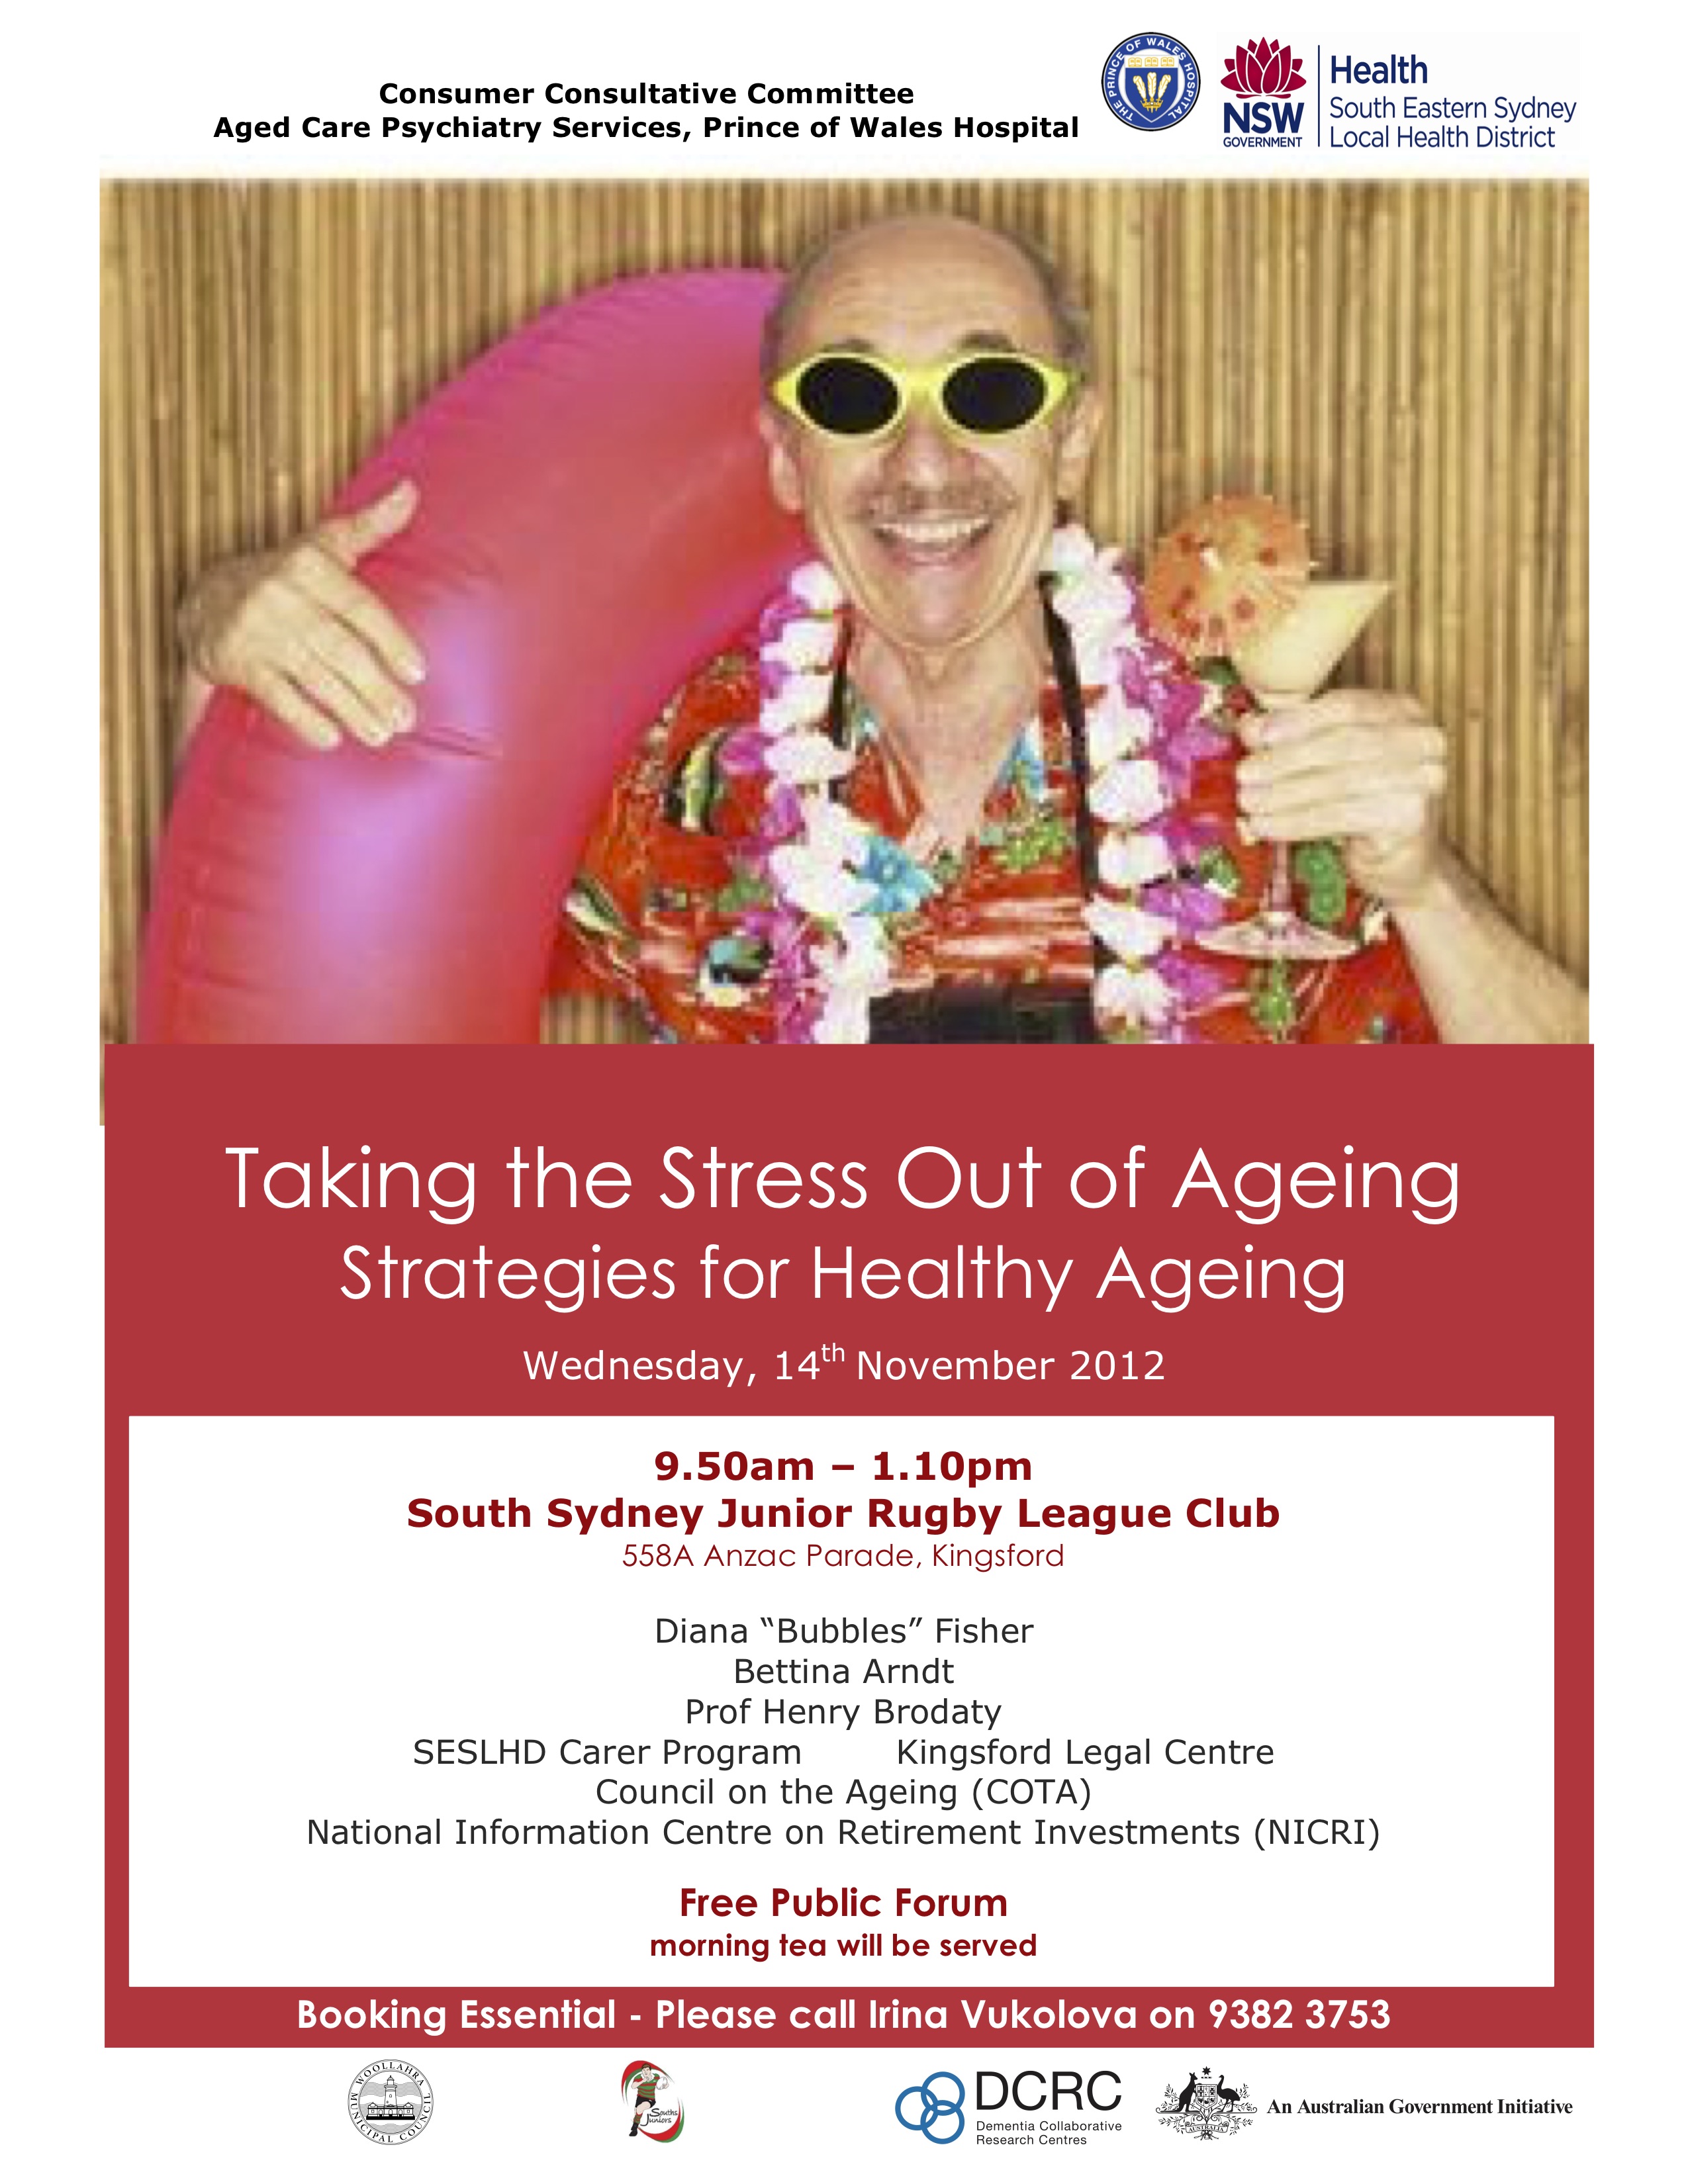 2012 TAKING THE STRESS OUT OF AGEING Strategies for Healthy Ageing.jpg